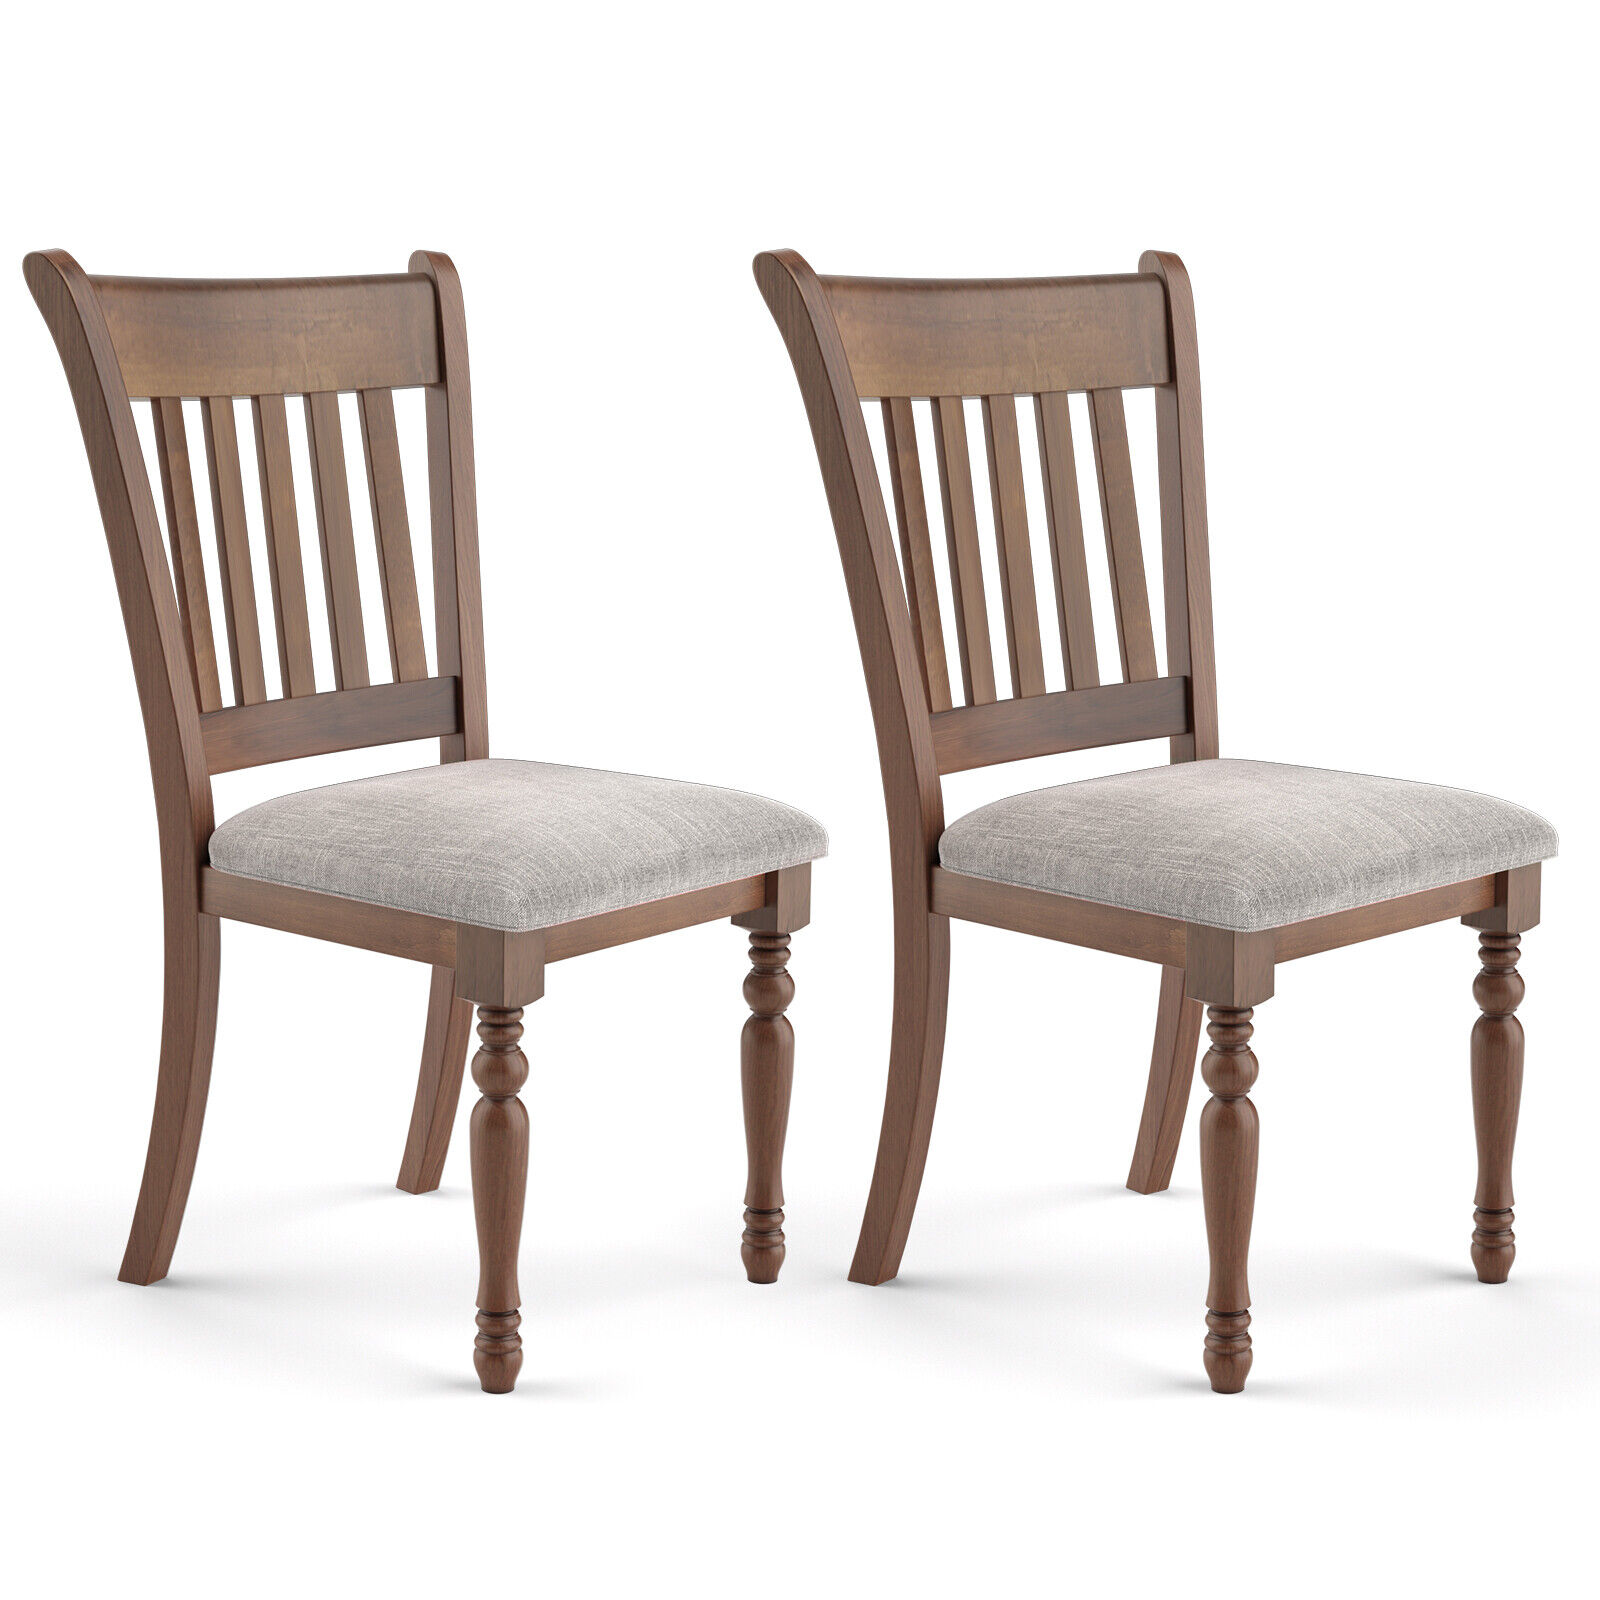 TKM Home Dining Chair Upholstered Set Of 2 Vintage Wooden Dining Chair W/ Padded Cushion